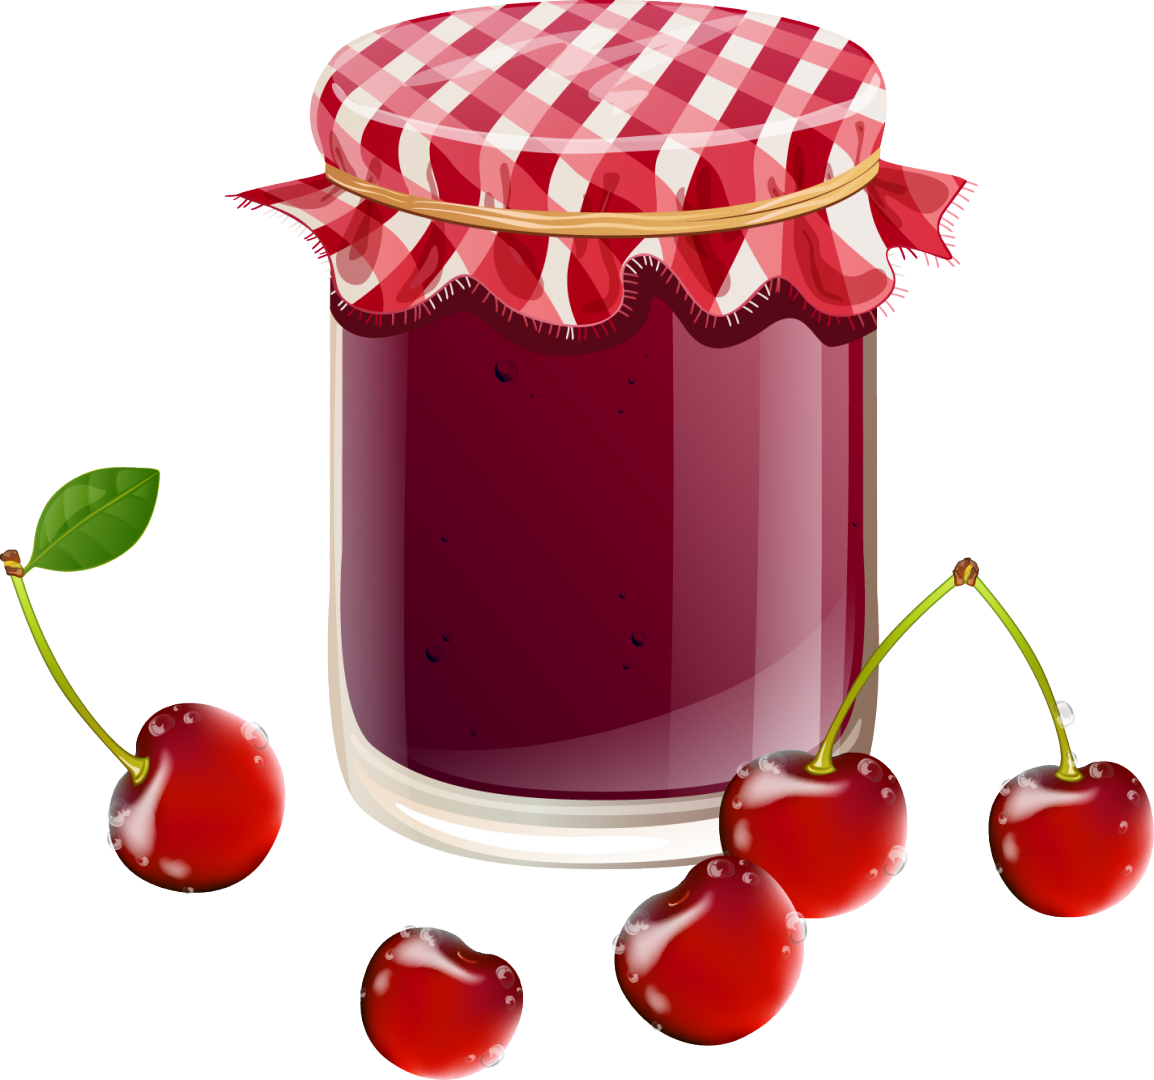 A Jar Of Jam And Cherries